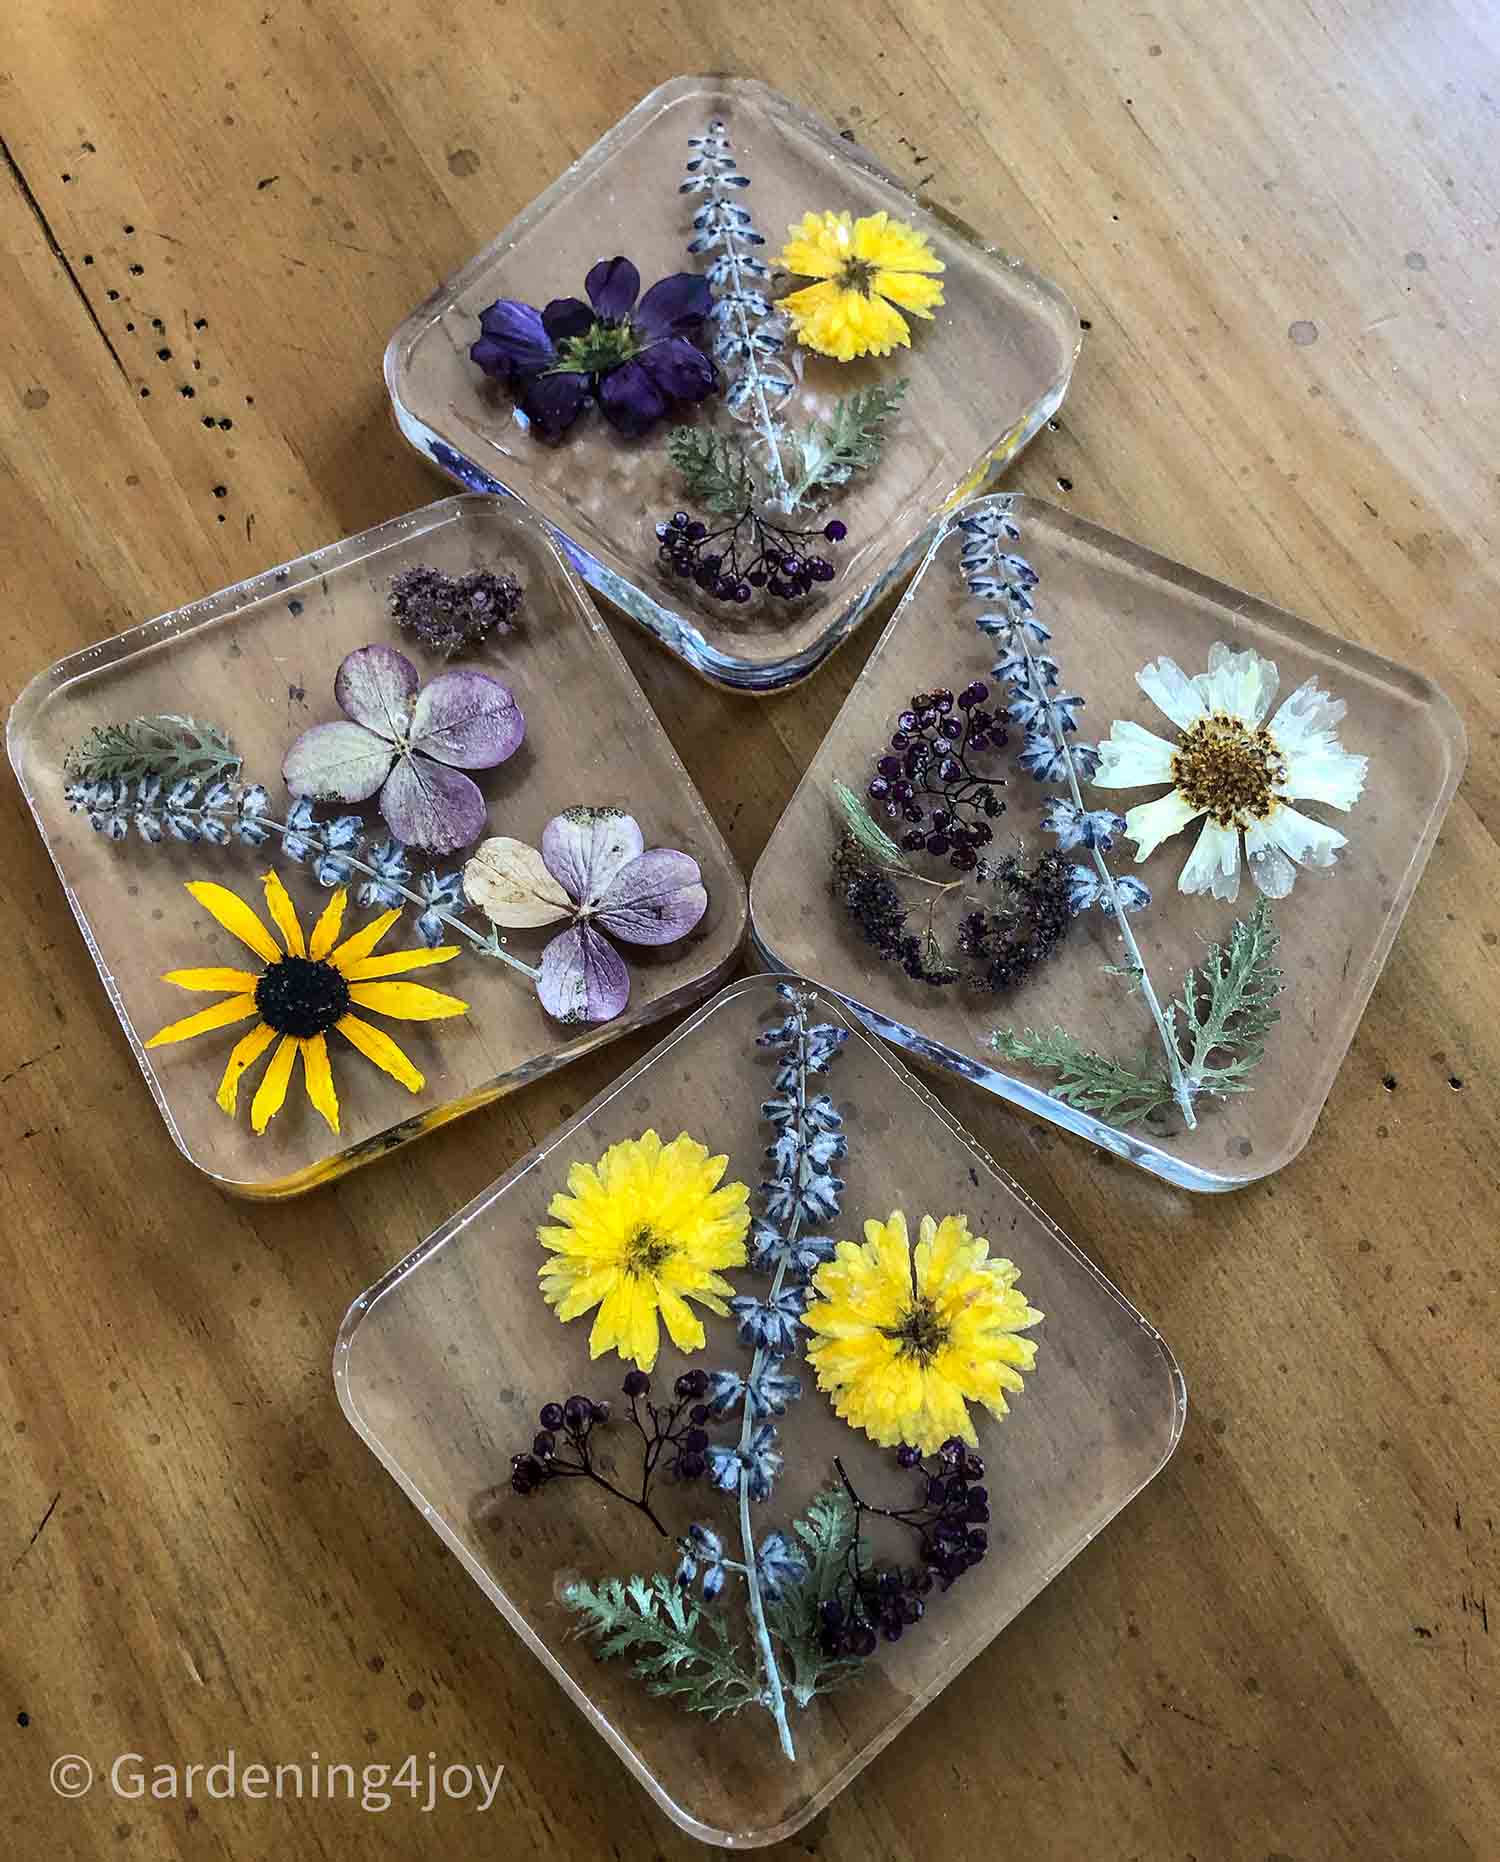 How to Make Pressed Flower Coasters 